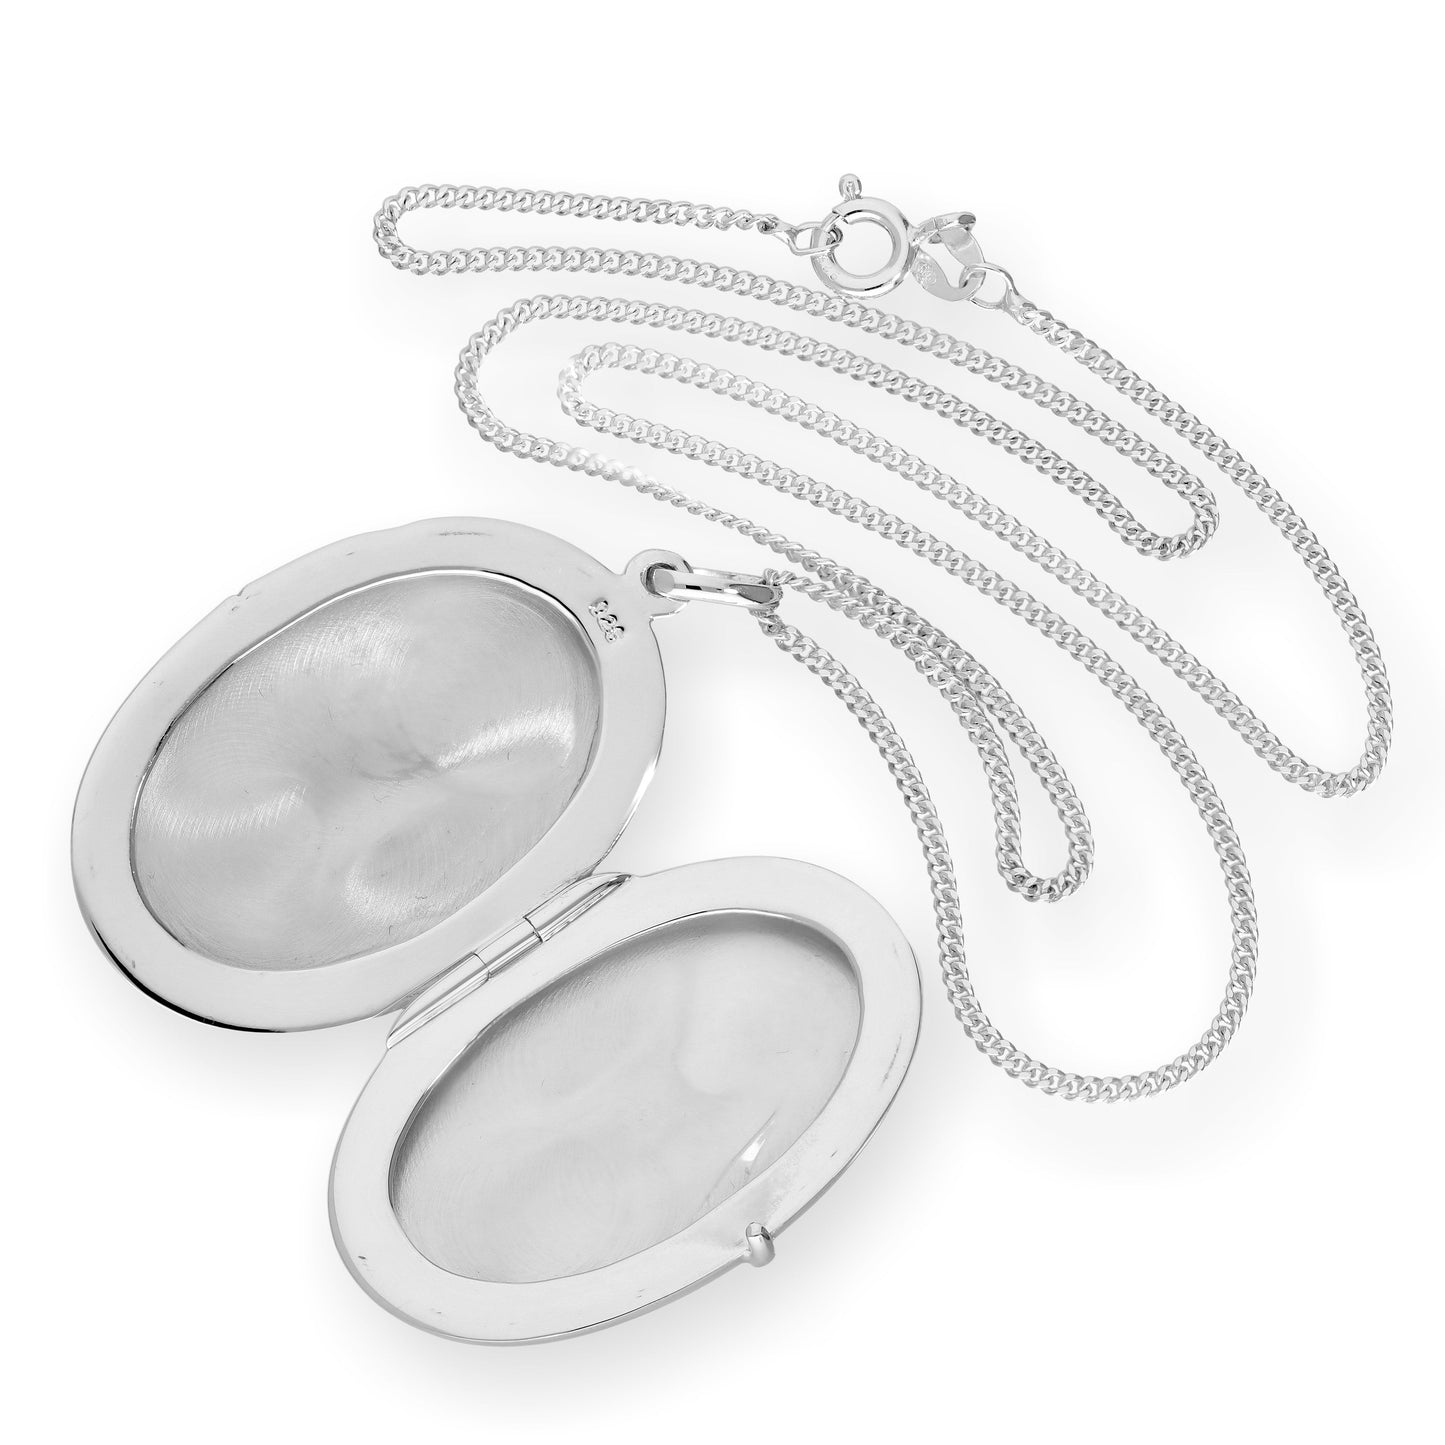 Large Sterling Silver Engravable Oval Locket on Chain 16 - 24 Inches